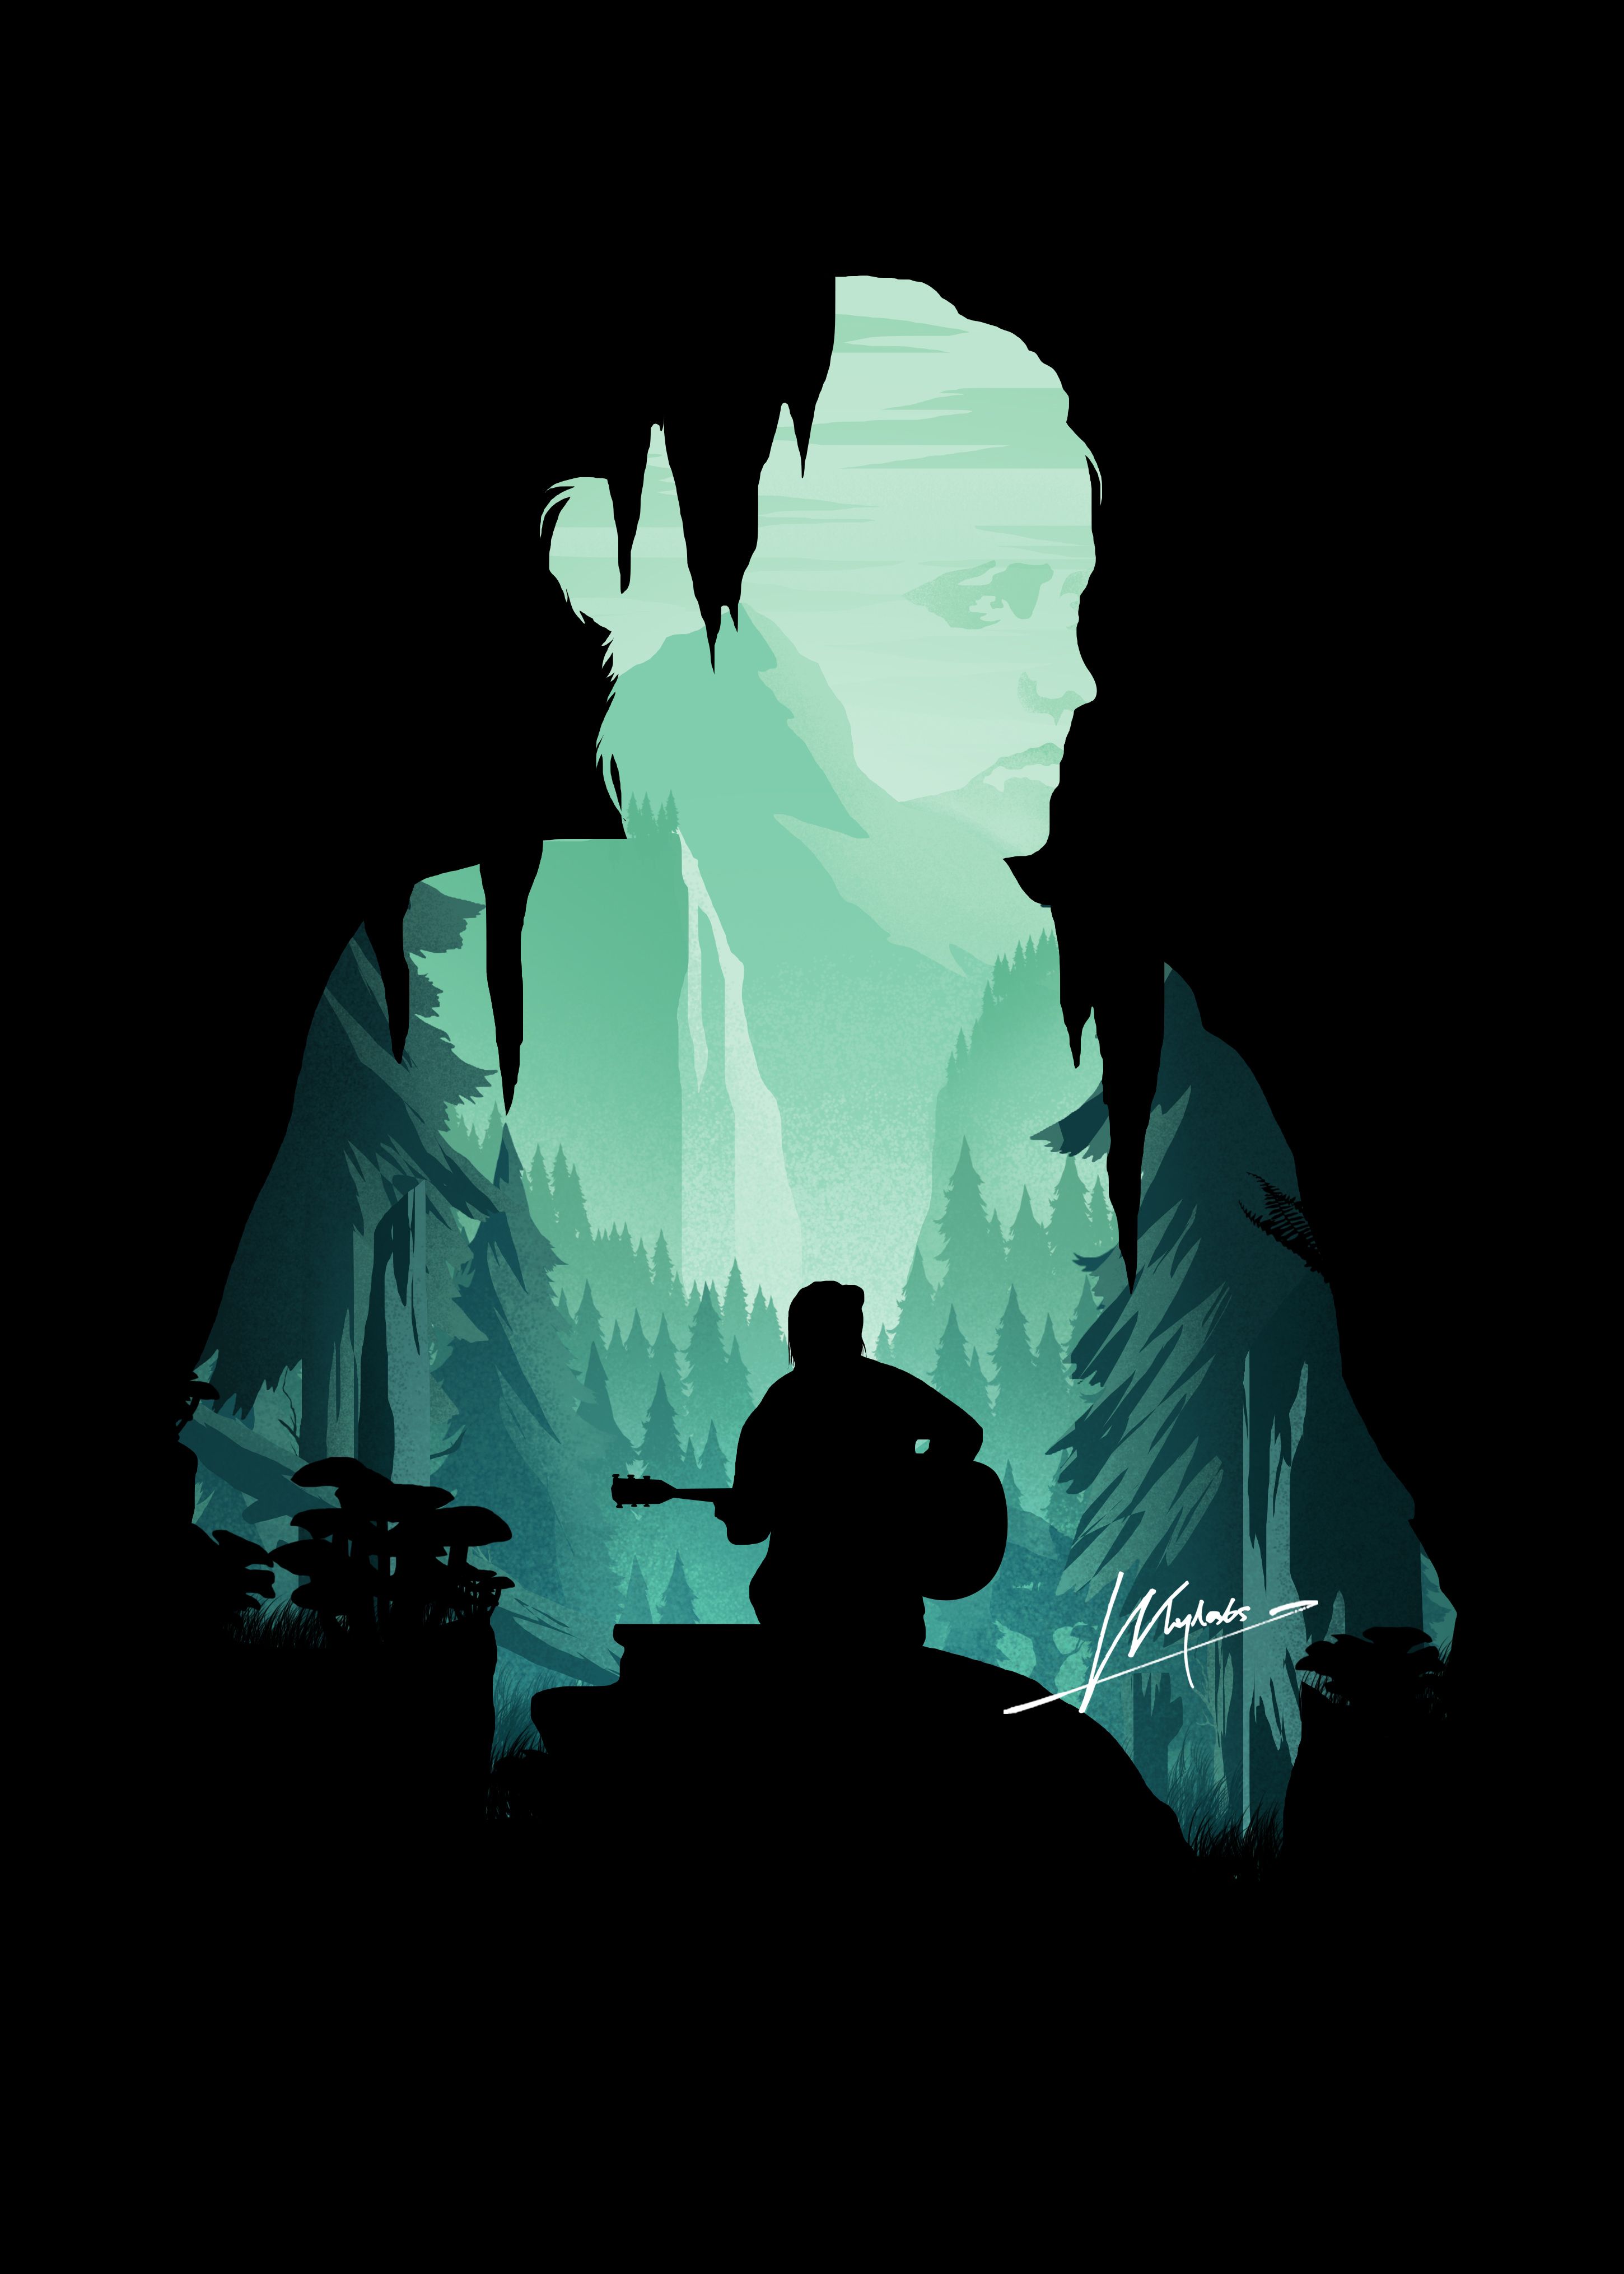 Ellie The Last of Us 2' Poster by whyadiphew. Displate. The lest of us, The last of us, The last of us2